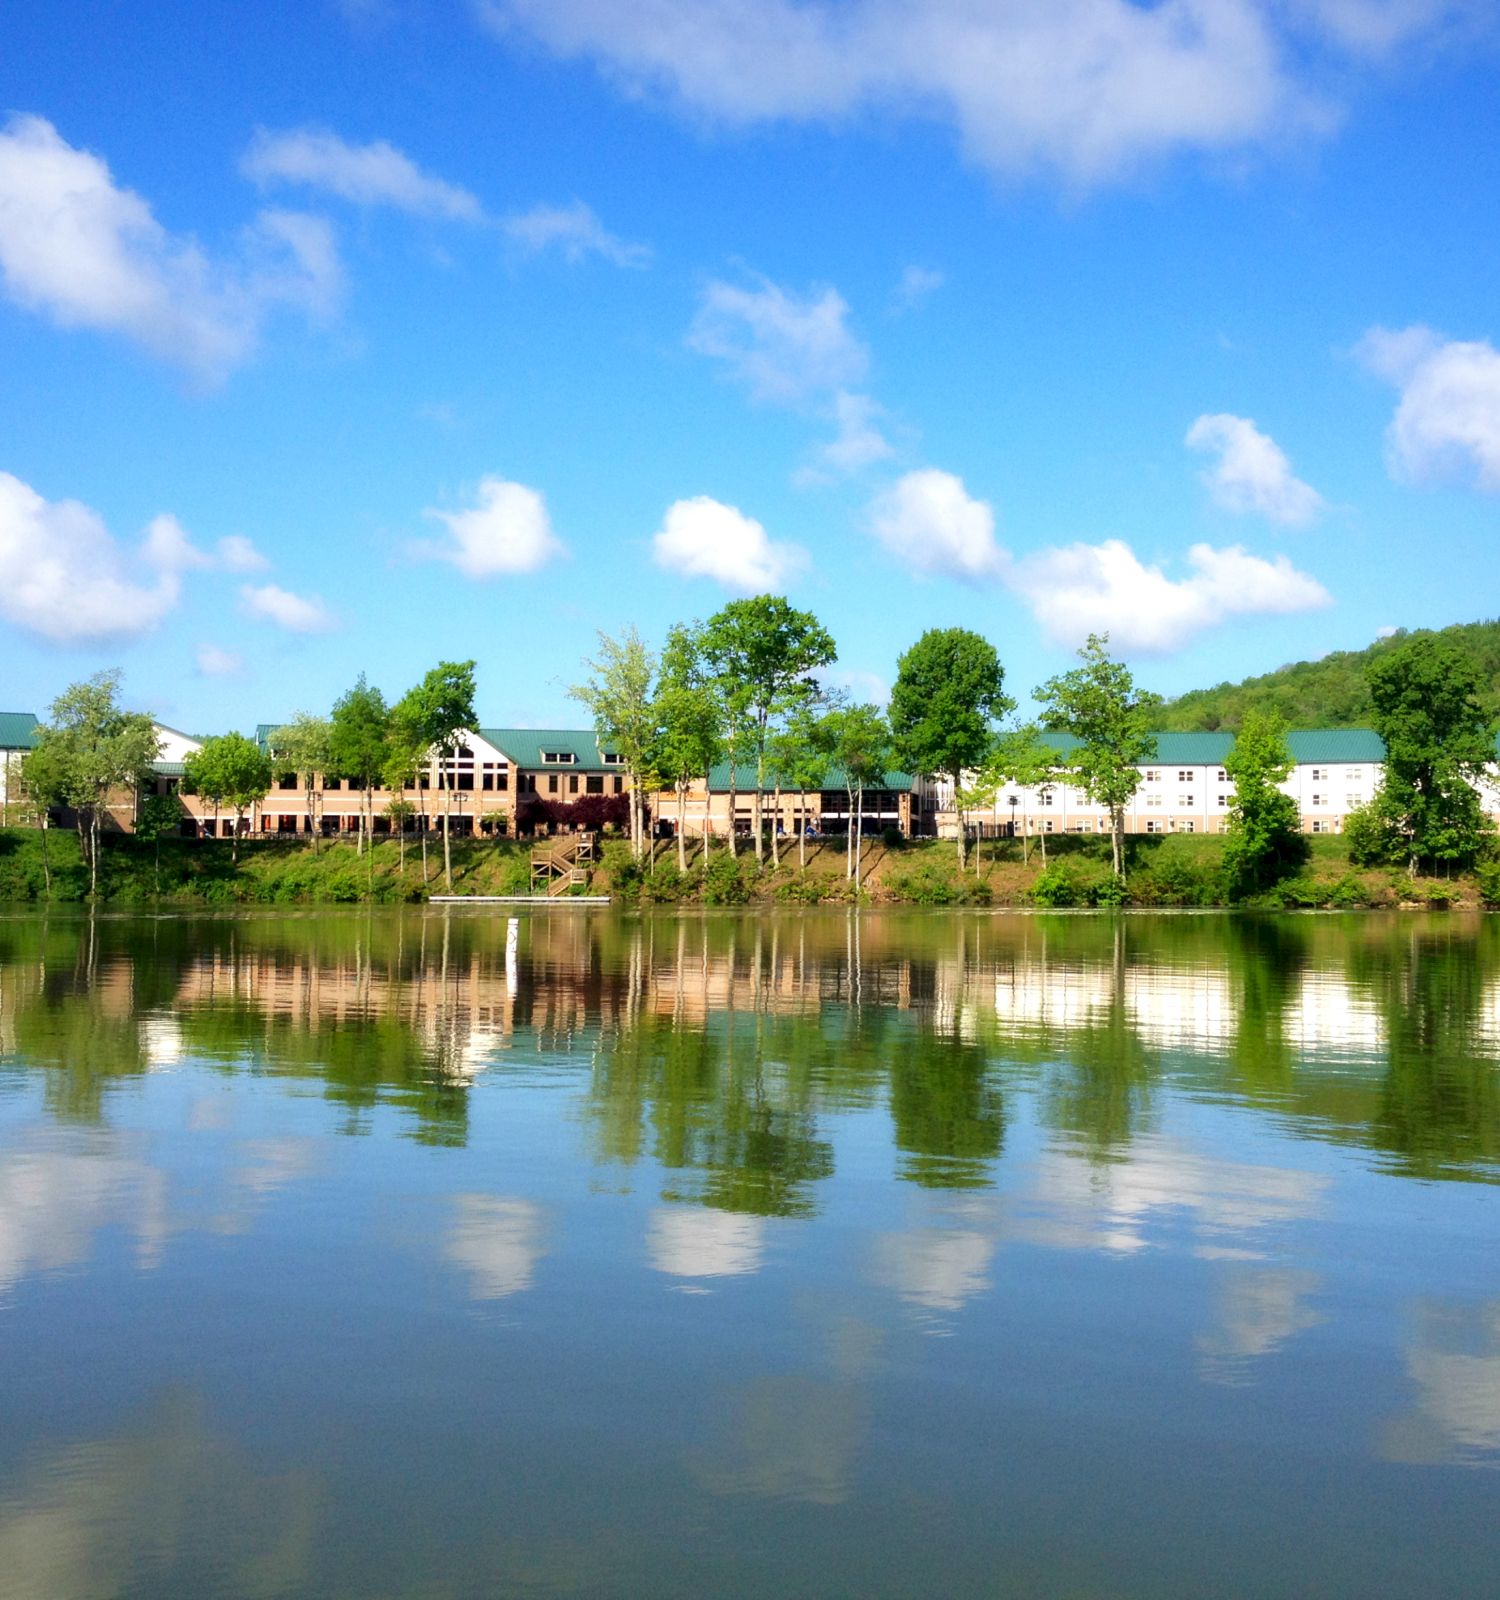 A serene lakeside view with buildings and trees reflected in the calm water under a bright blue sky with scattered clouds.